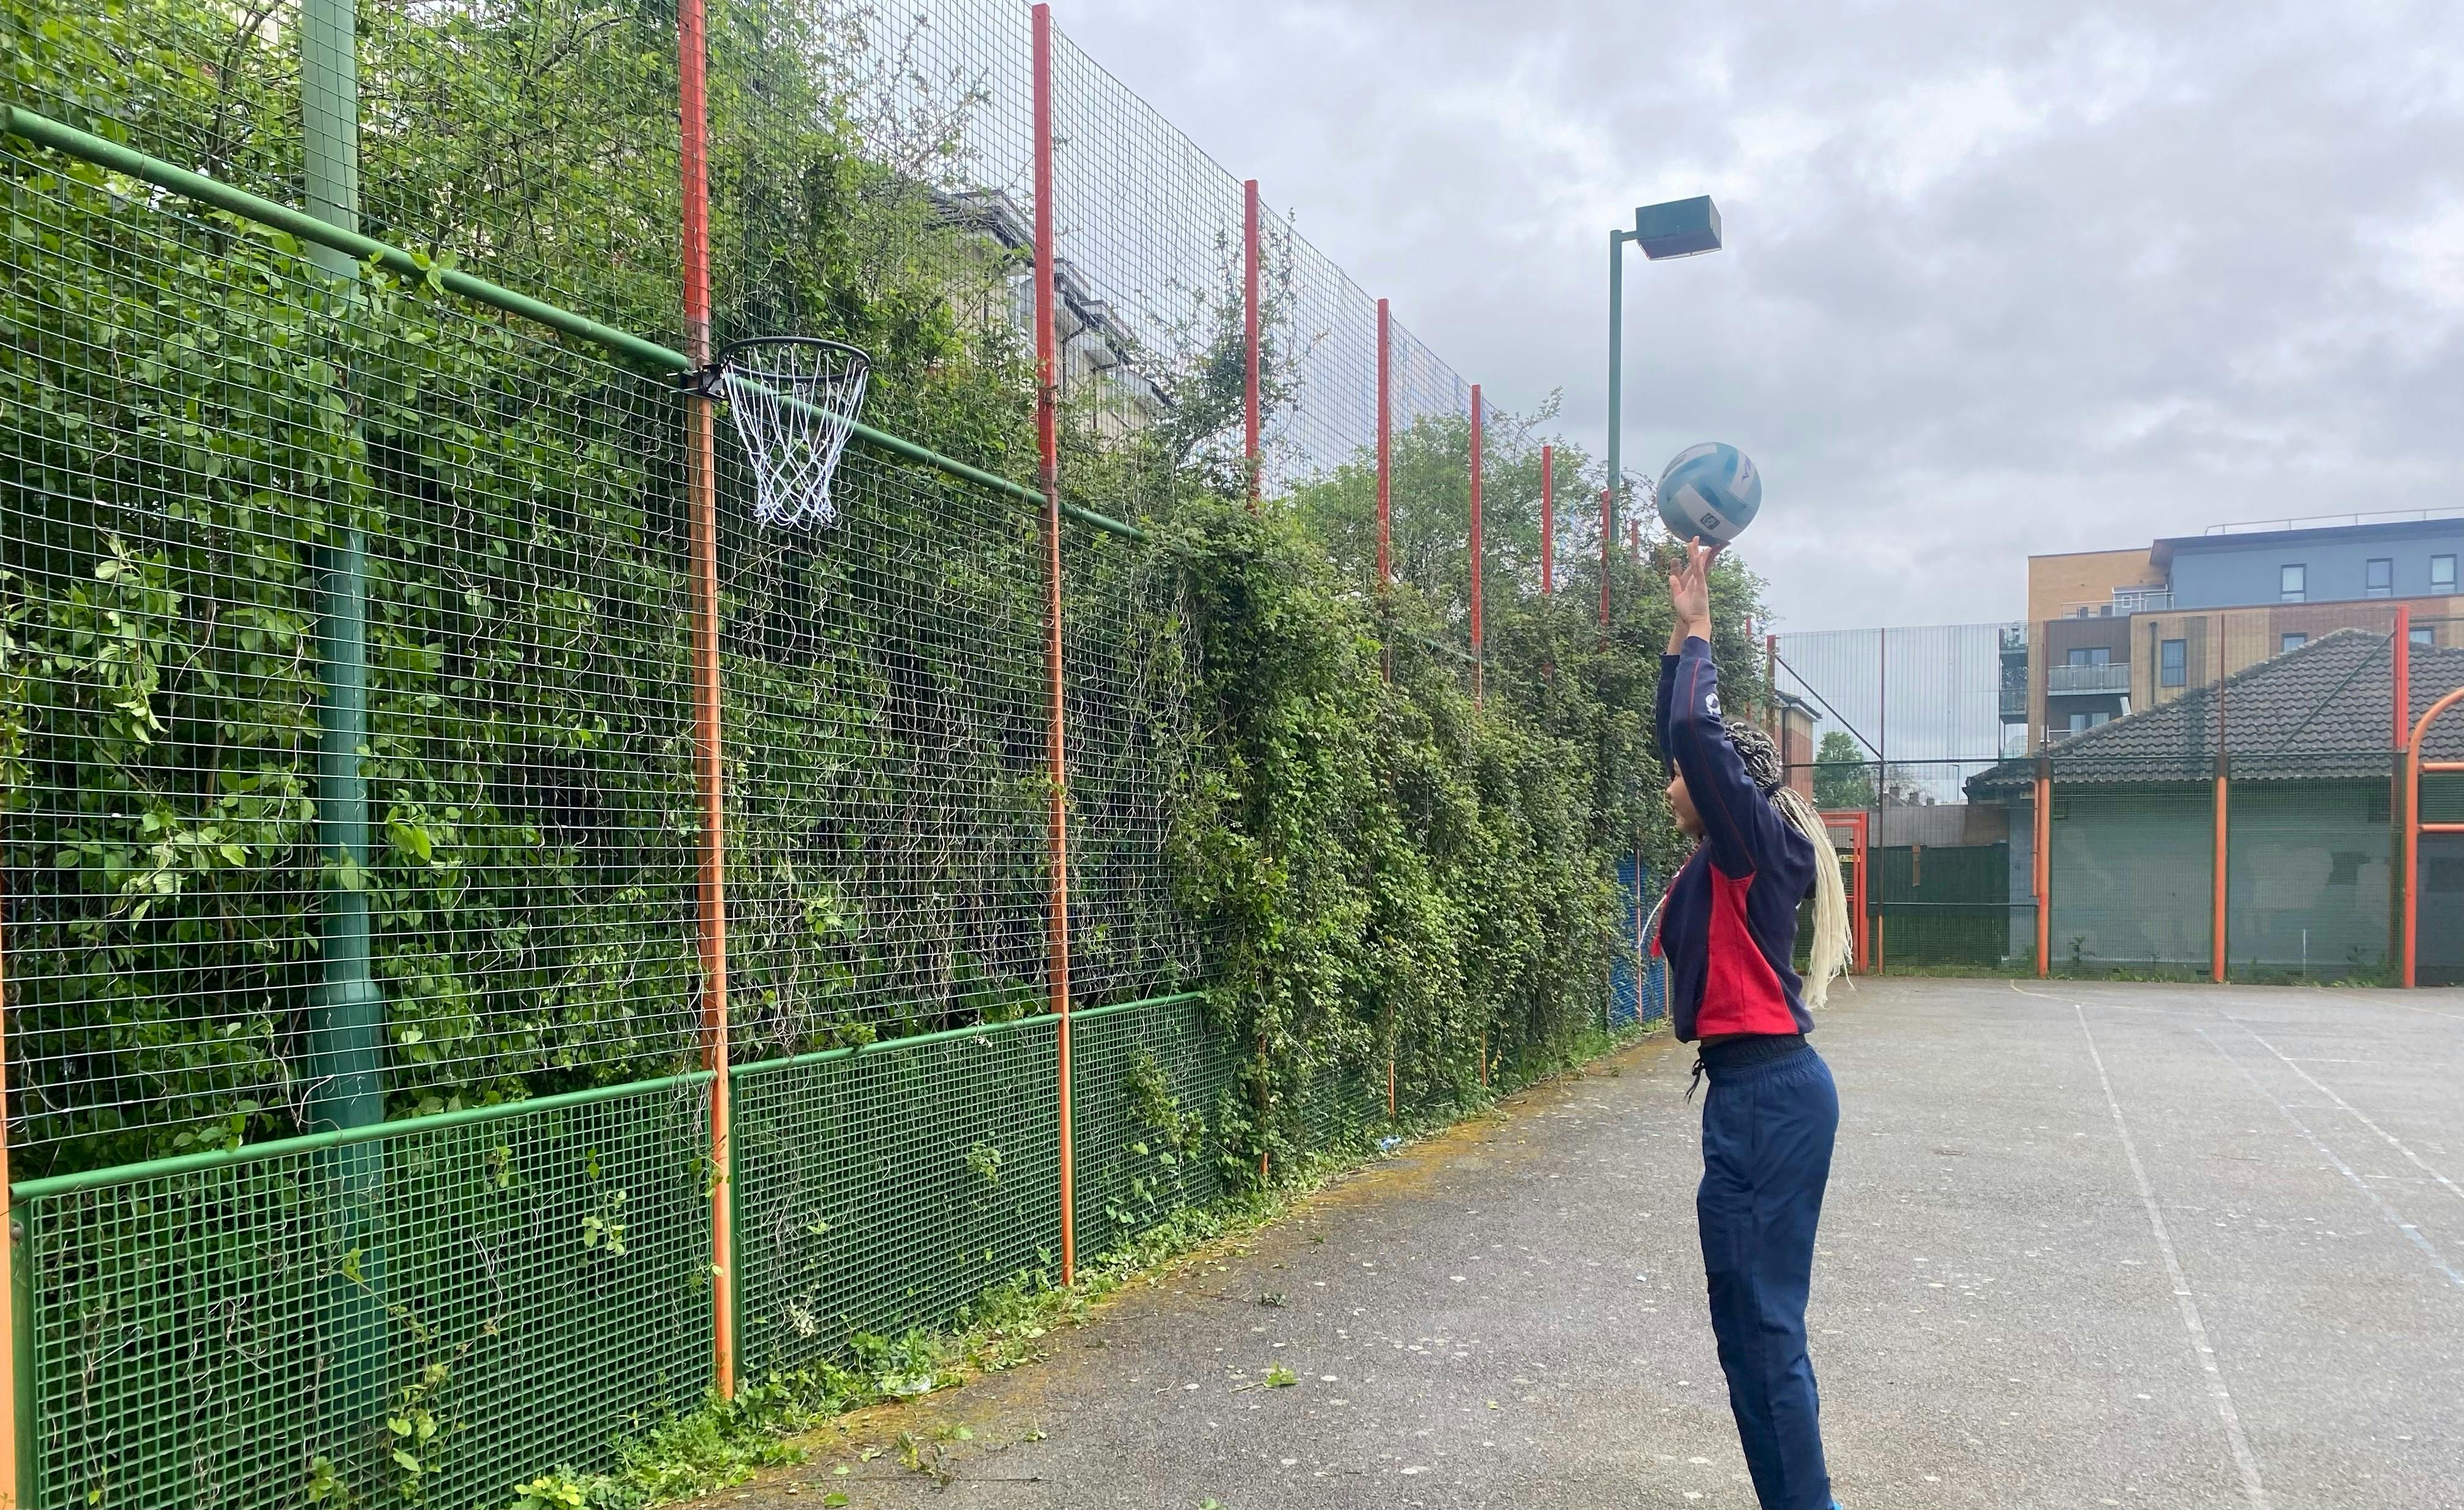 Netball Post installed as a result of World Cafe discussion